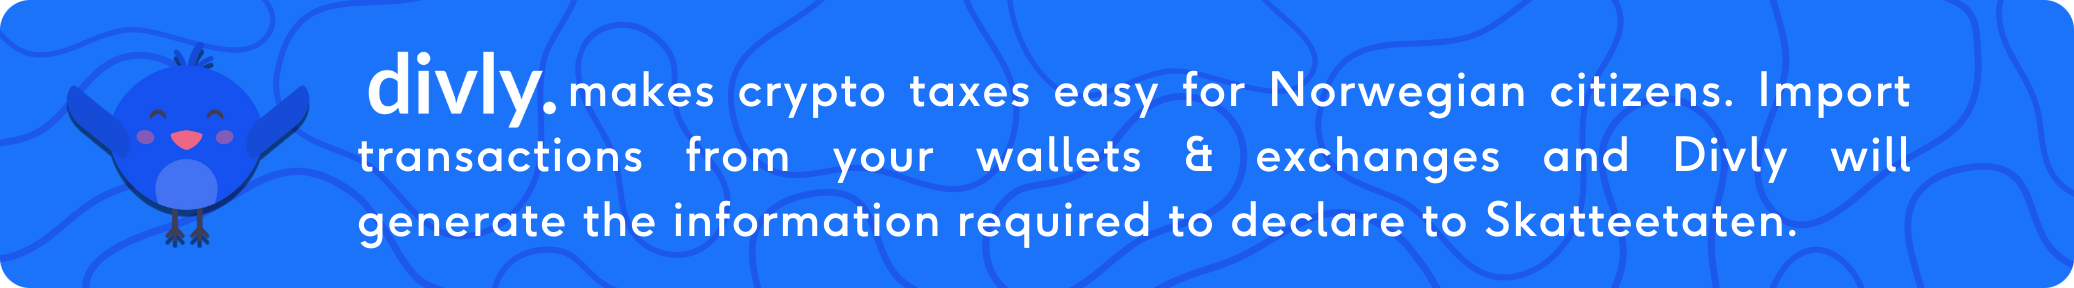 Divly makes crypto taxes easy for Norwegian citizens. Import transactions from your wallets & exchanges and Divly will generate the information required to declare to Skatteetaten